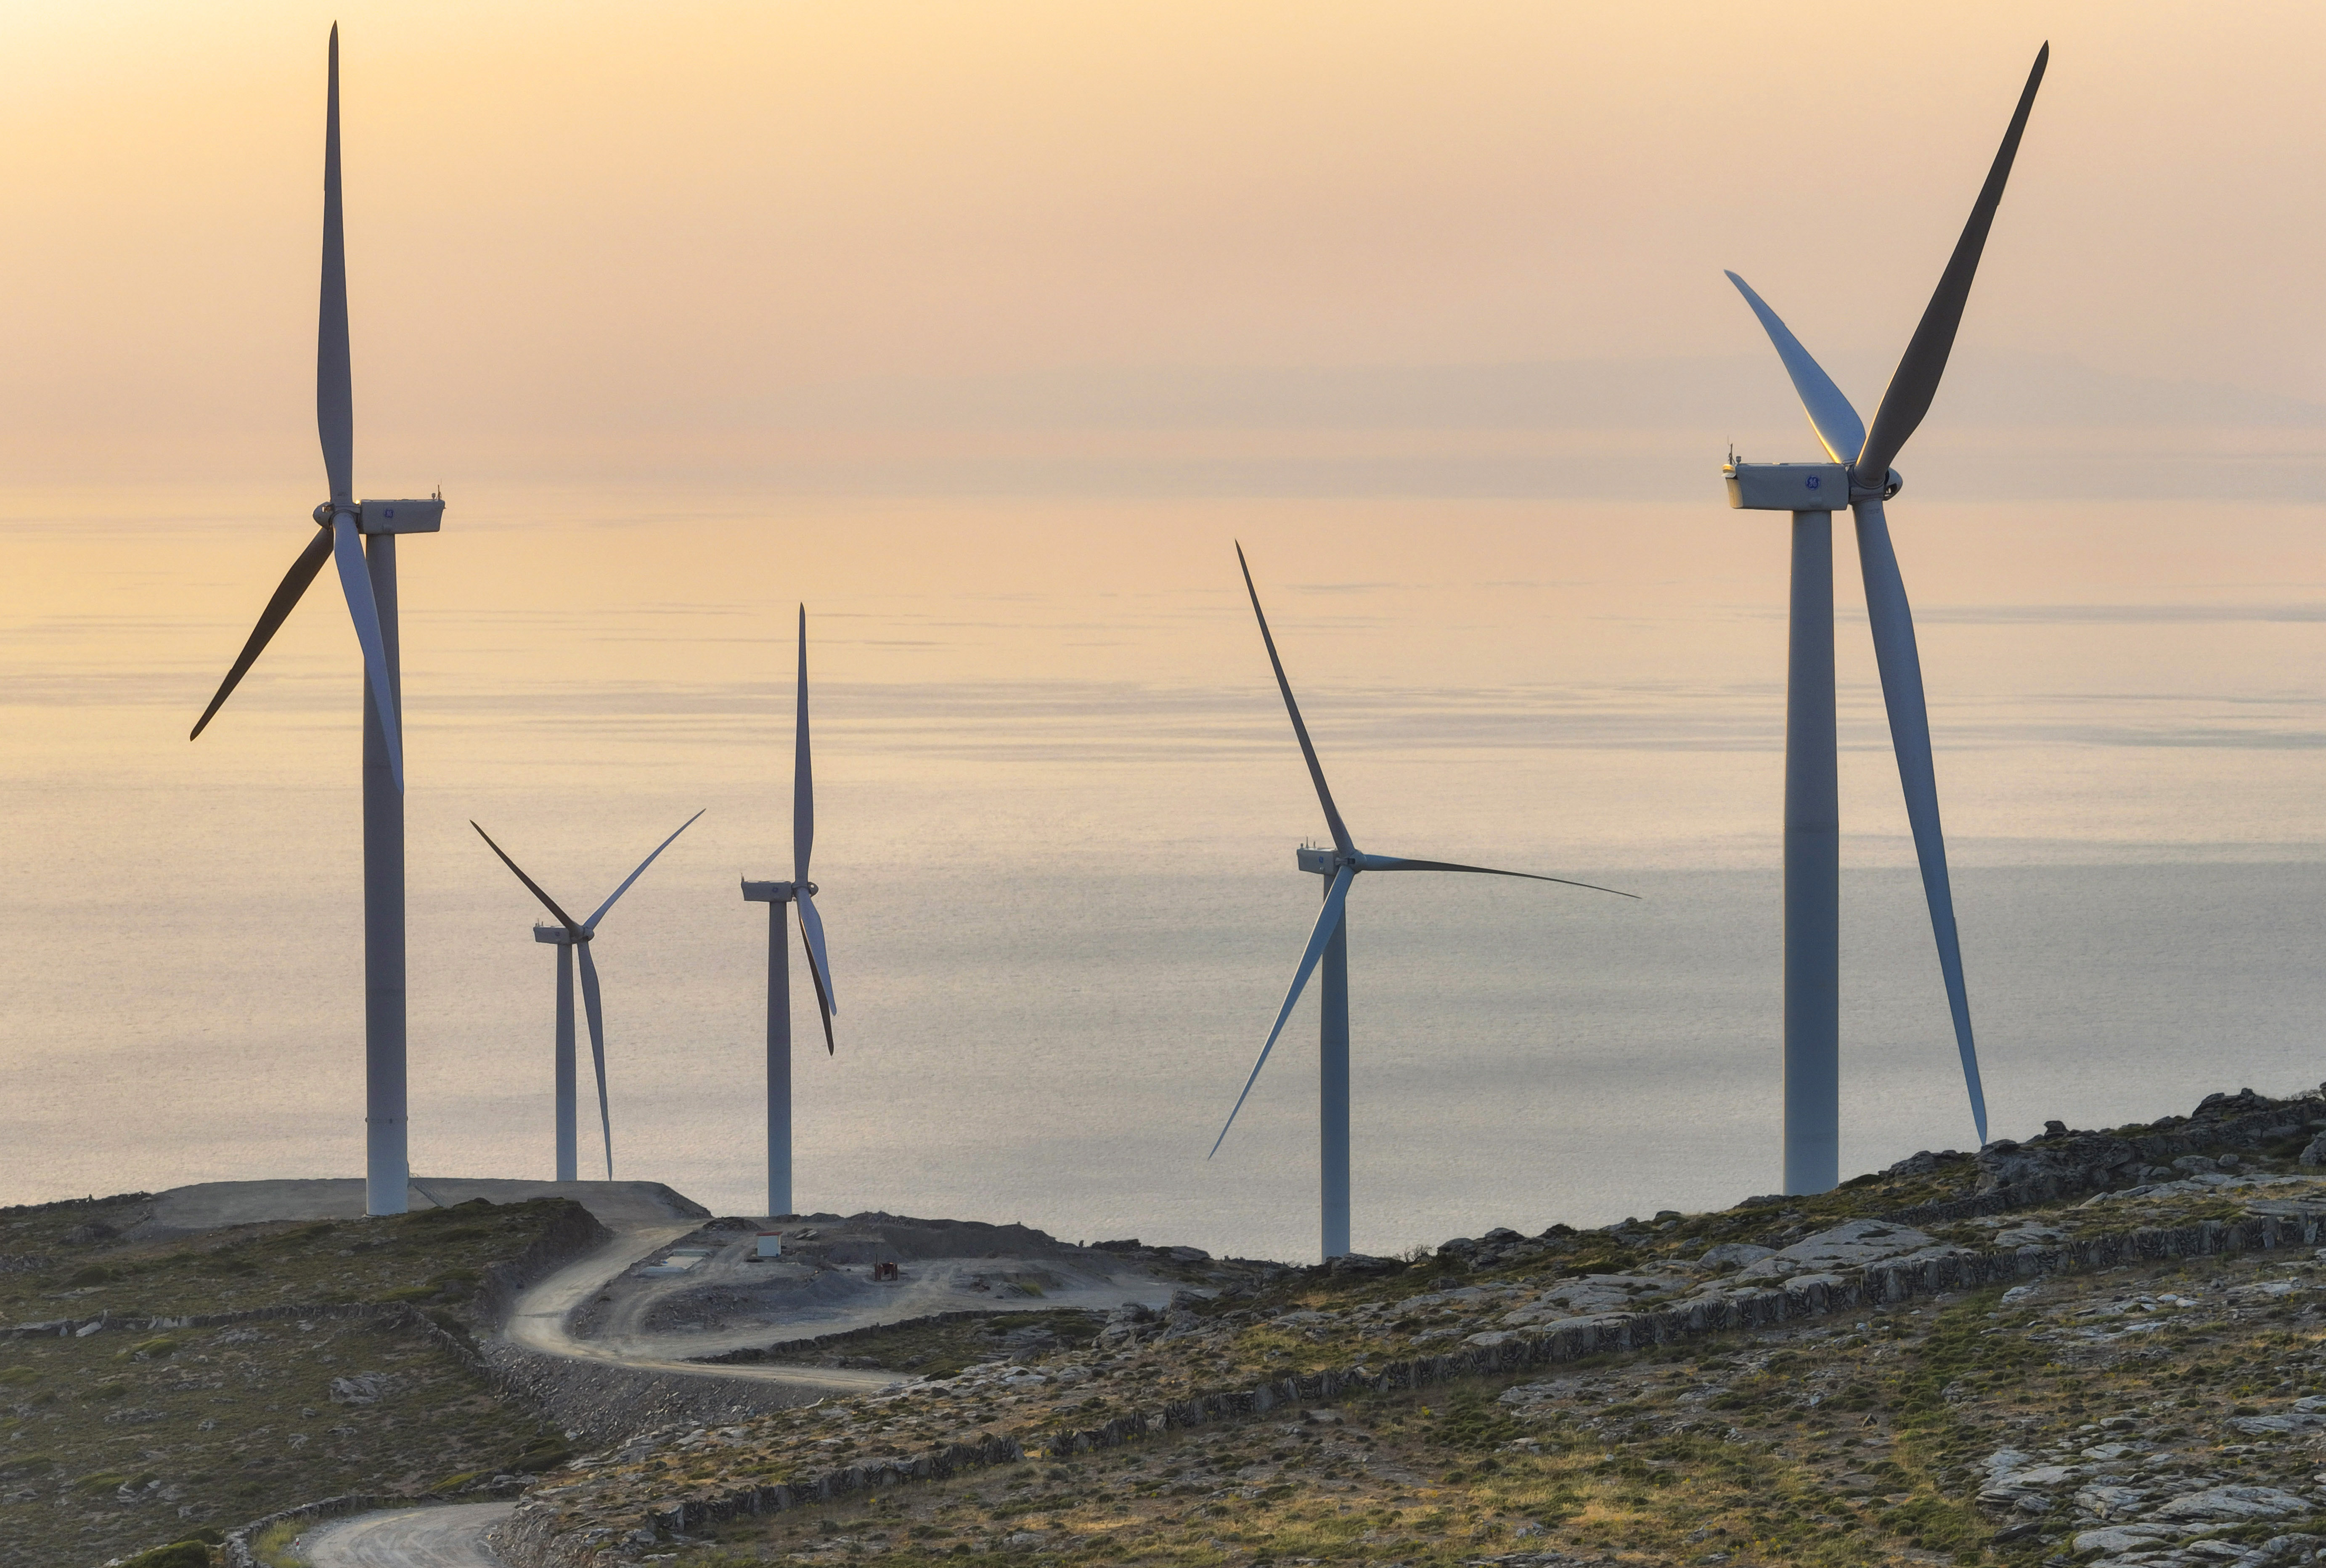 Intrakat delivers a 15MW wind park in Andros island in the Aegean